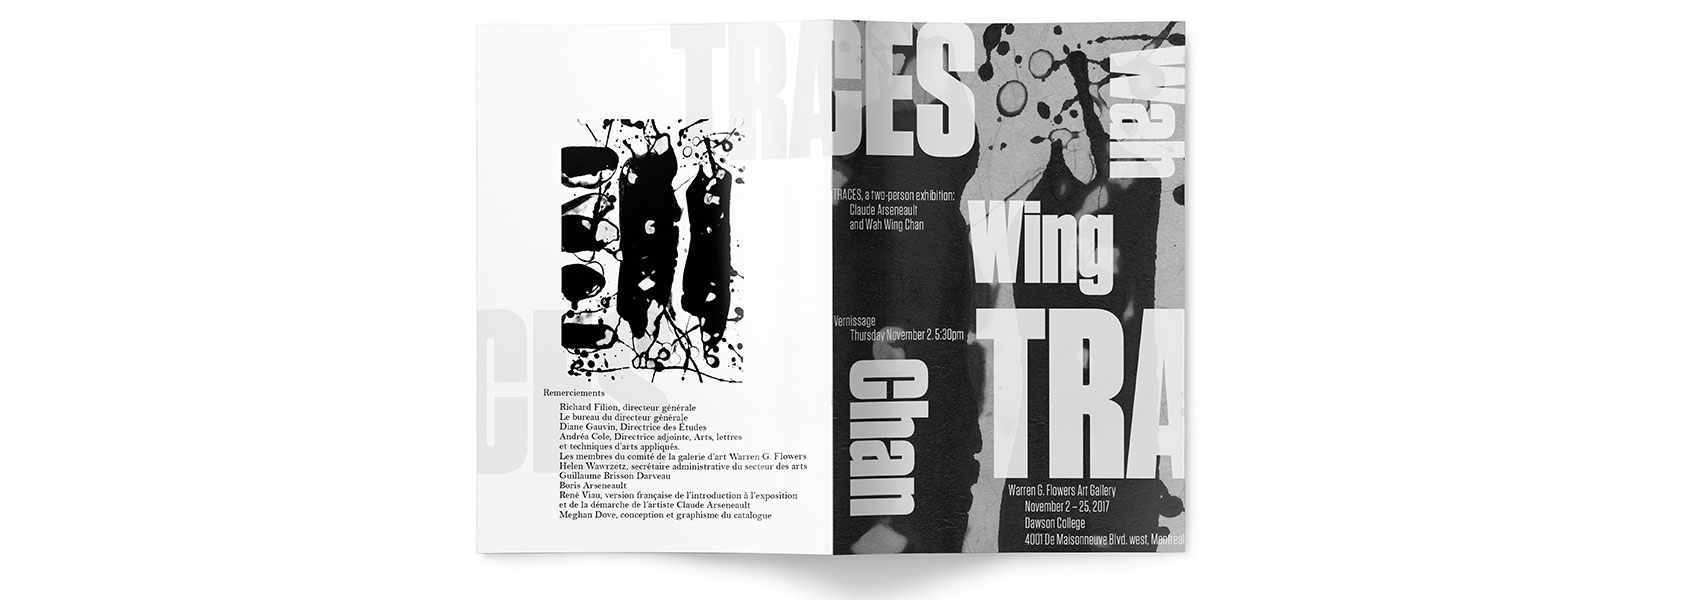 Inside spread of Traces Vernissage Catalogue featuring the print of Wah Wing Chang